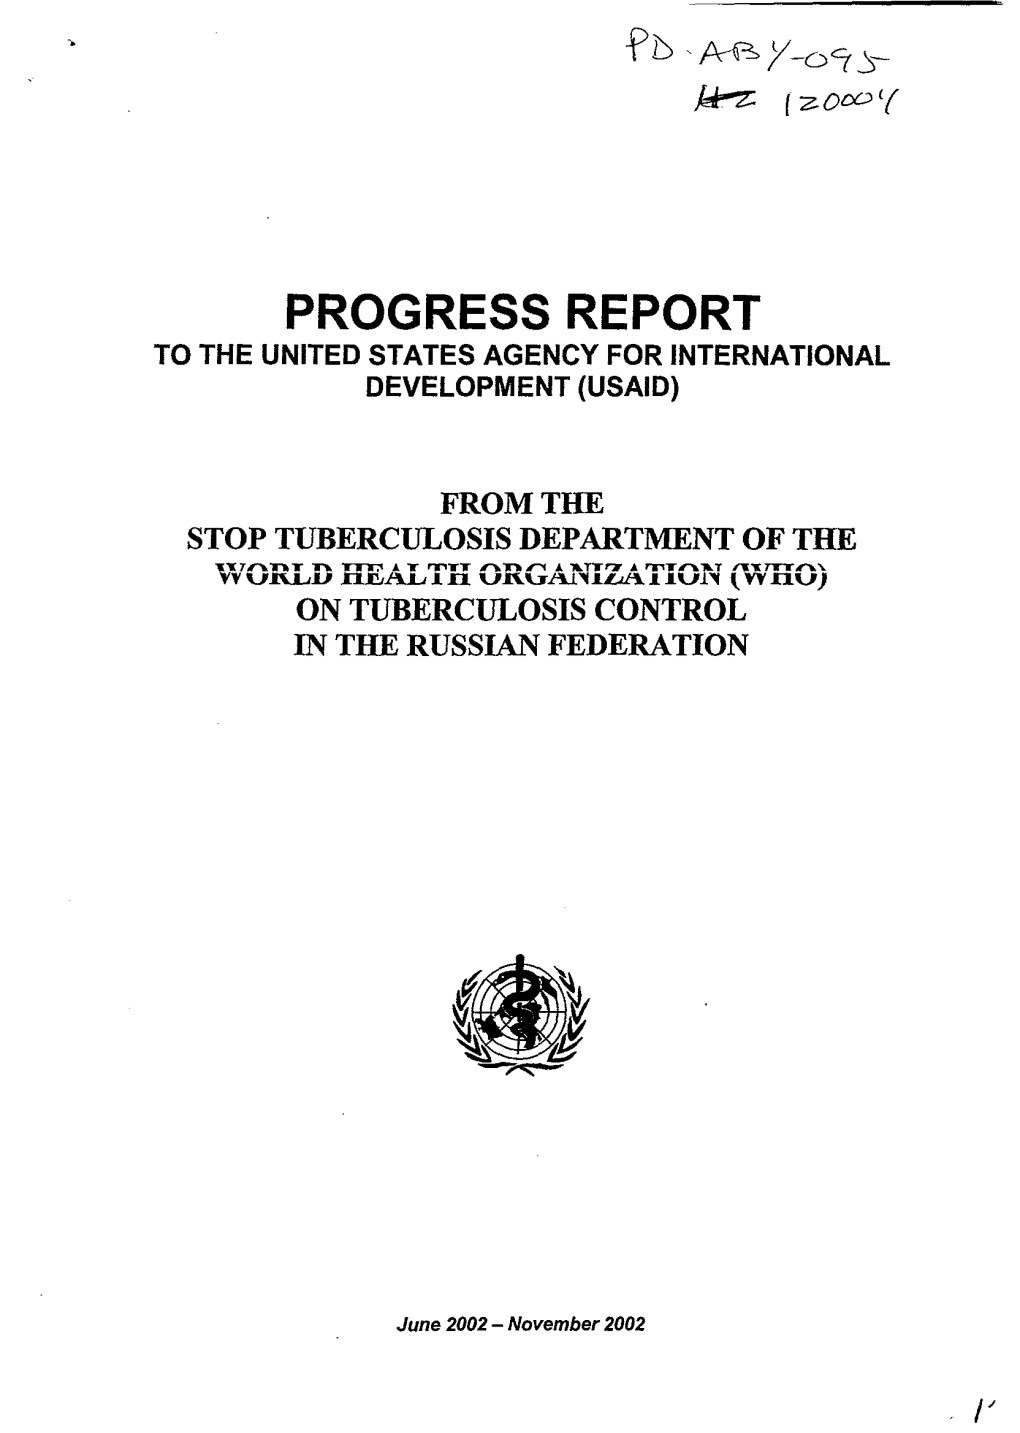 Progress Report to the United States Agency for International Development (Usaid)